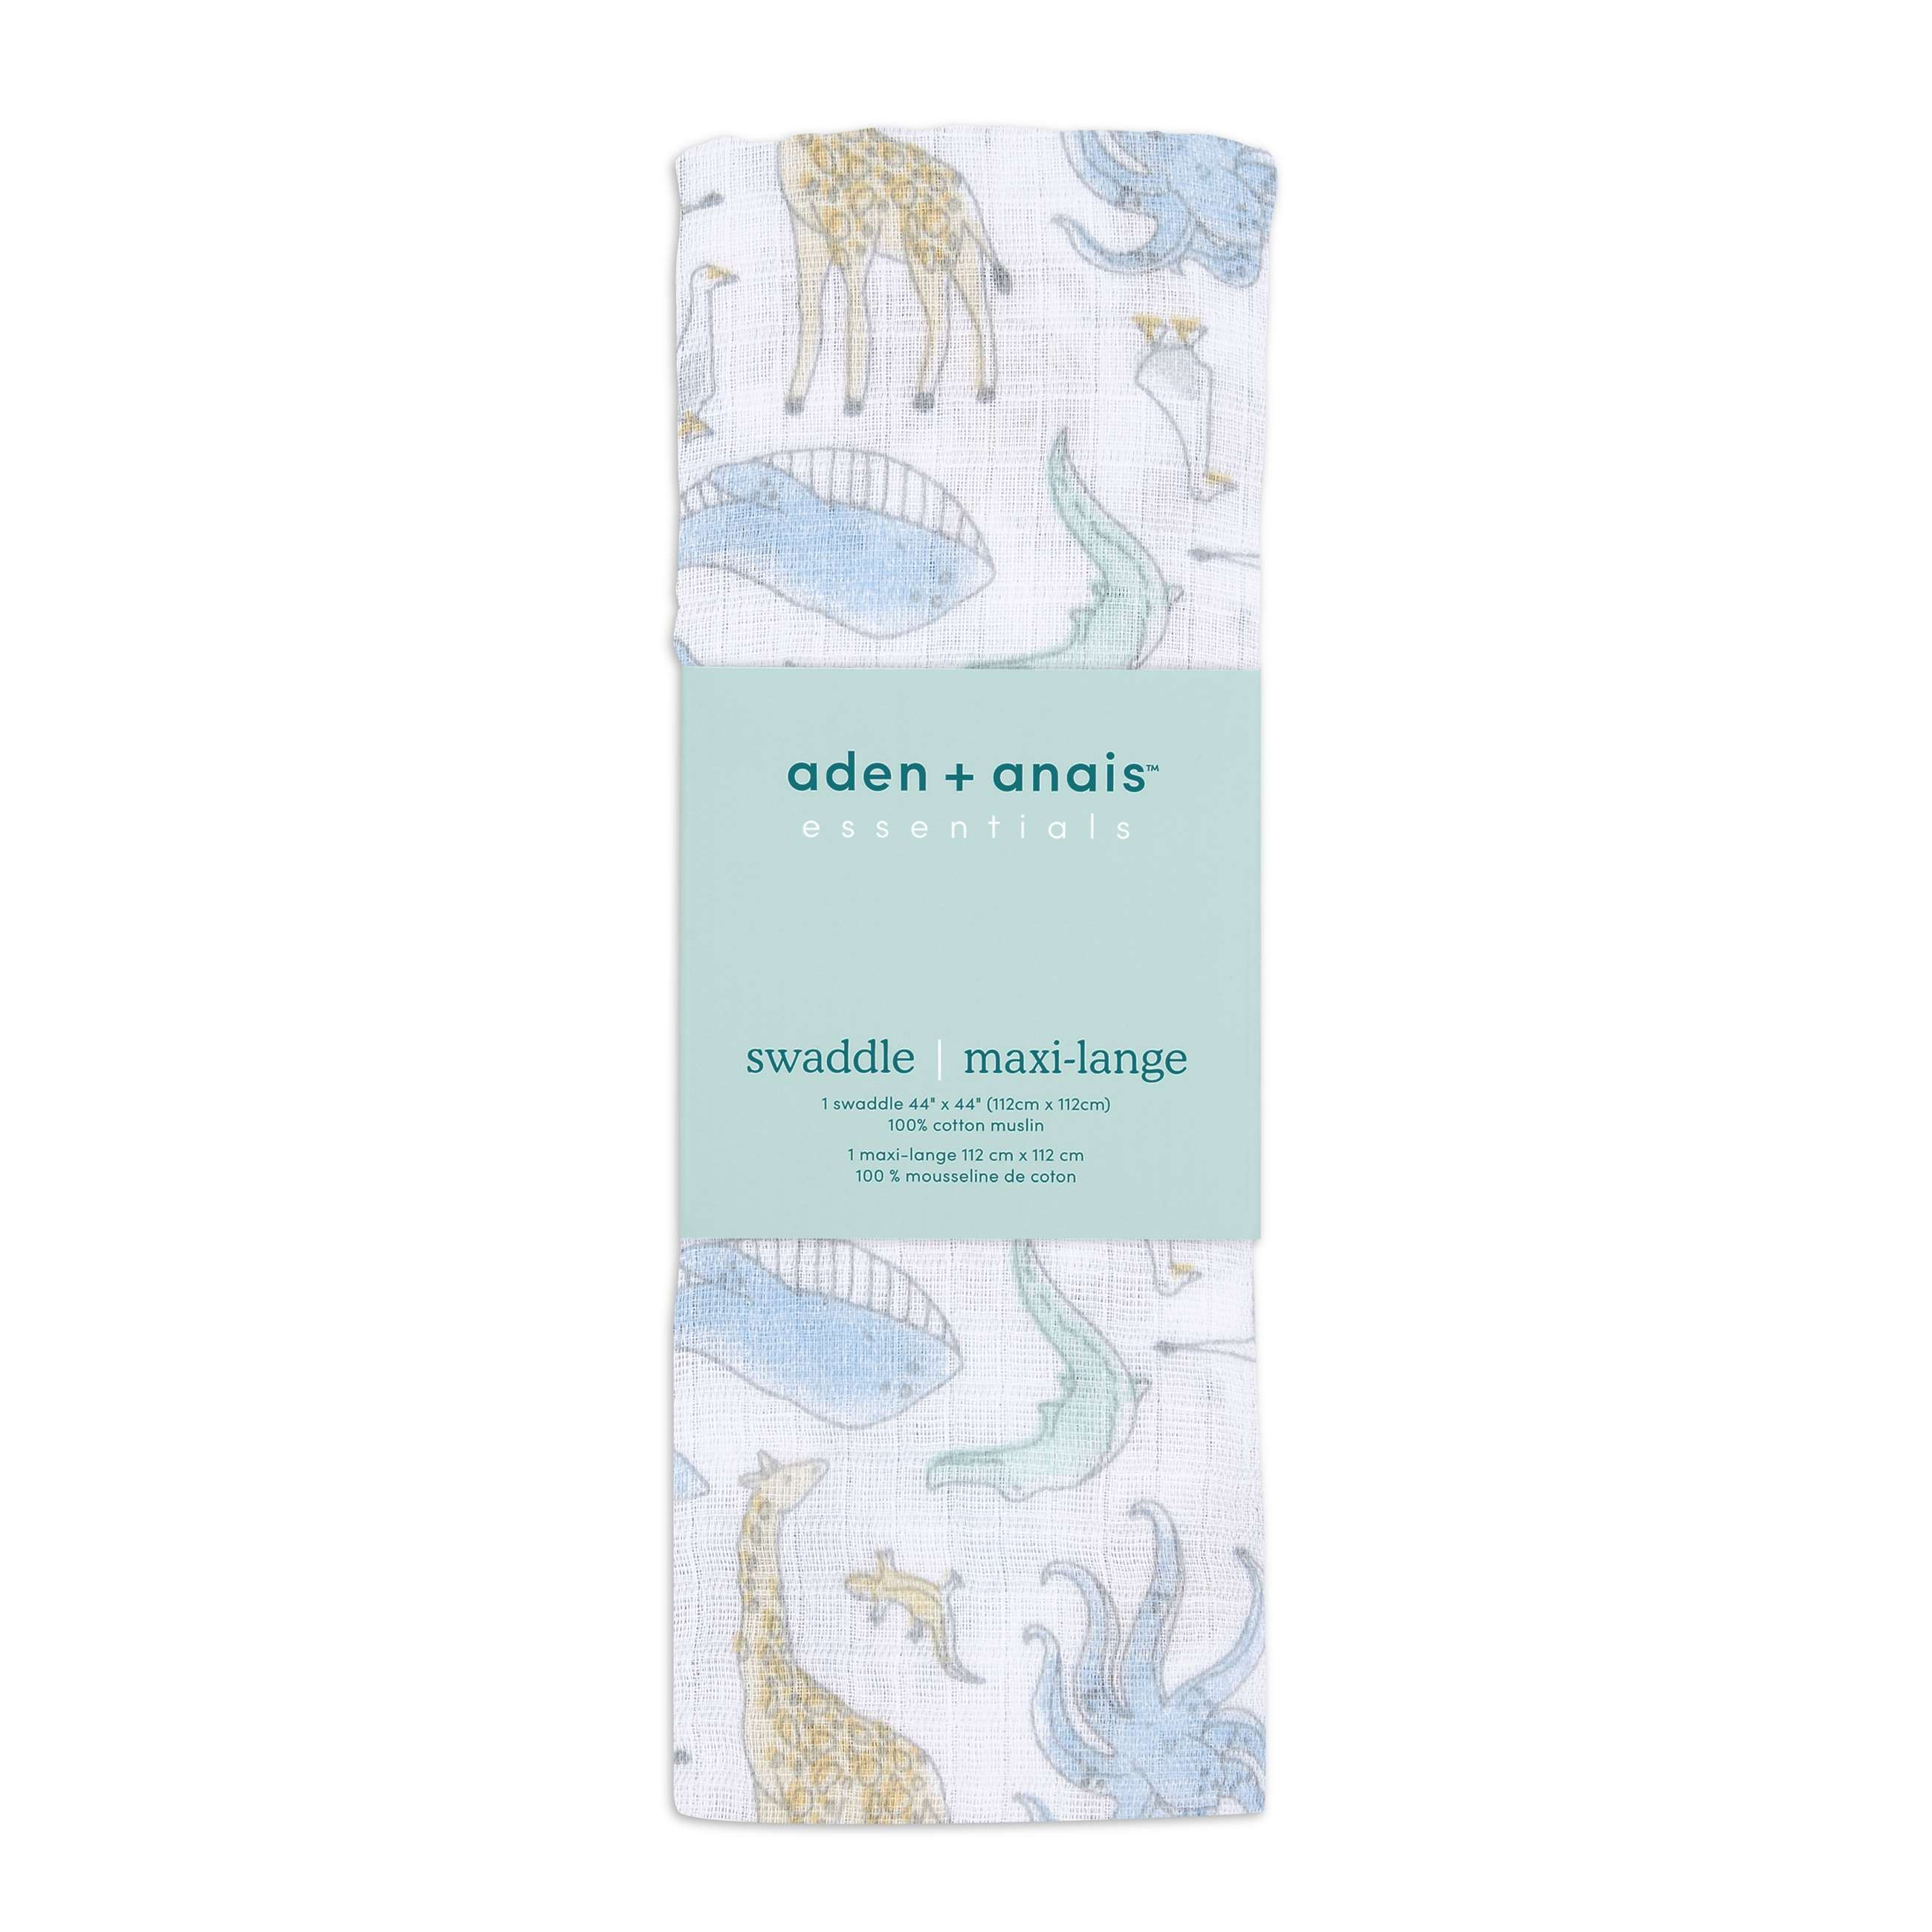 eswc10017_2-essentials-cotton-swaddle-natural-history-single